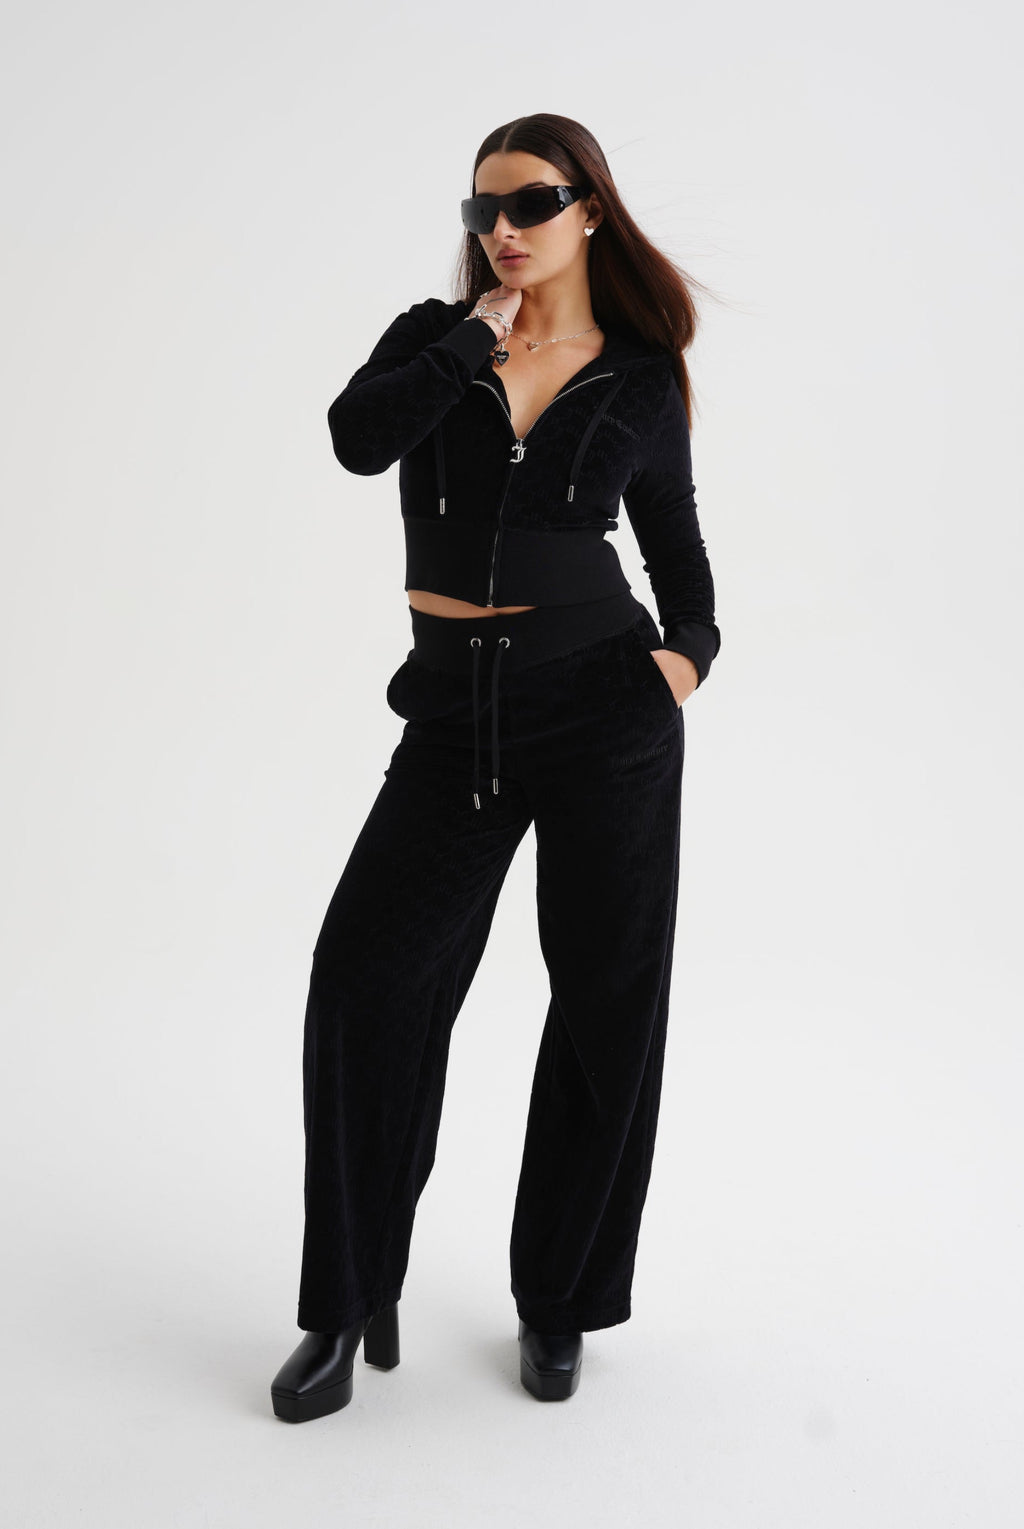 BLACK WIDE LEG ARCHED MONOGRAM LUXE VELOUR TRACK PANT